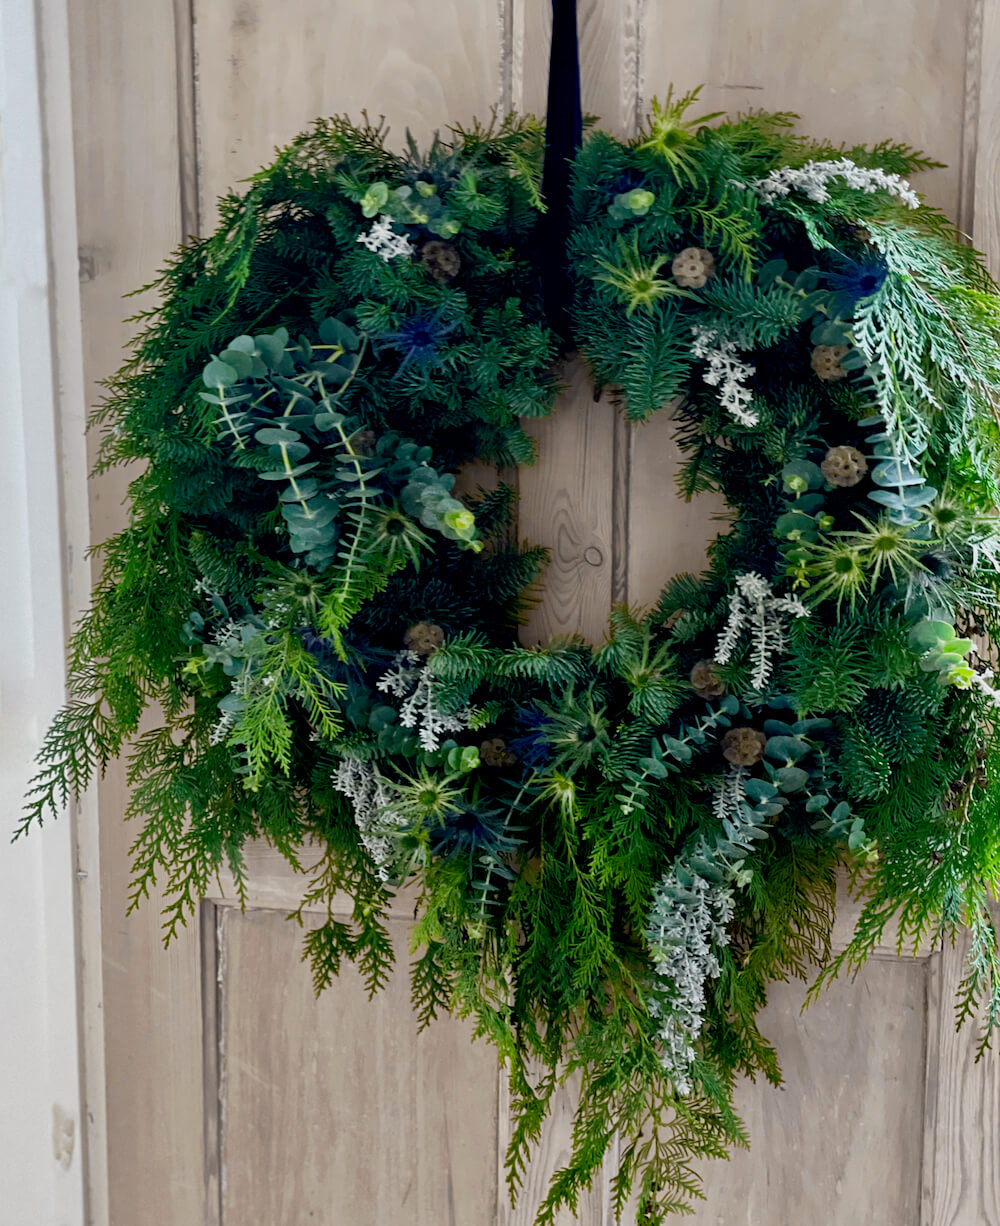 Relaxed soft christmas wreath against wooden door